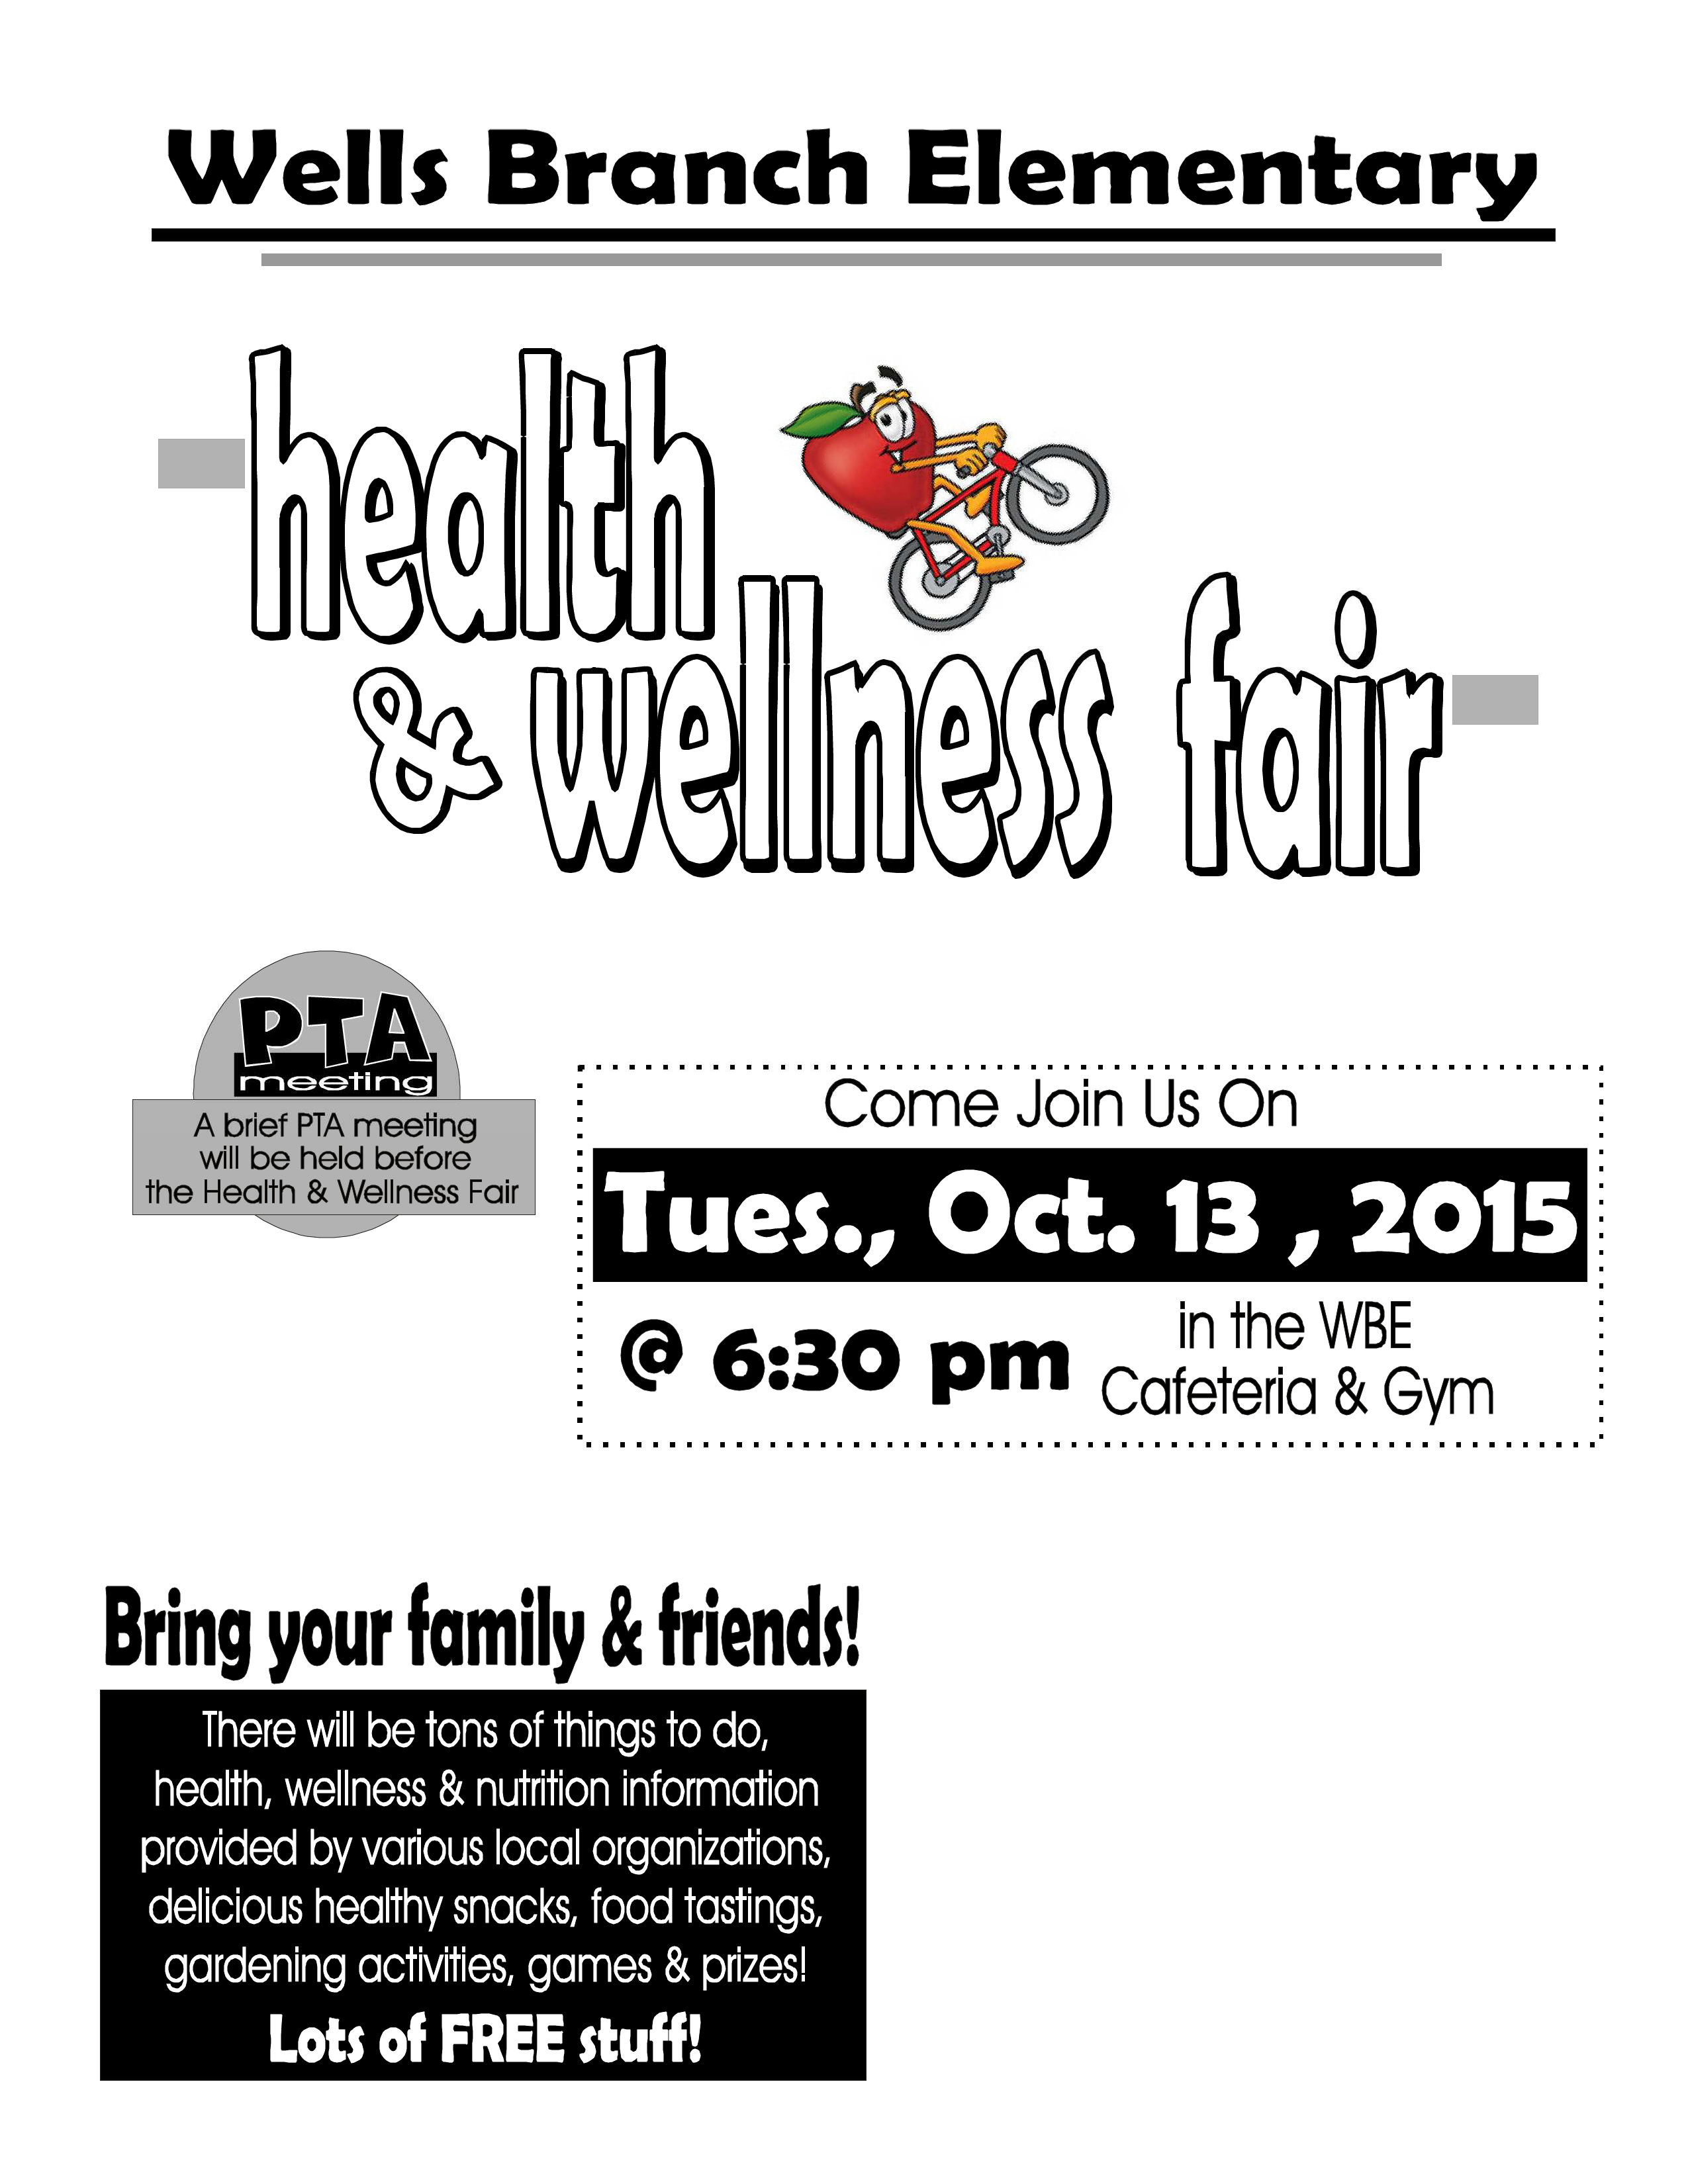 WBE Health Fair Full Page Flyer 1 copy